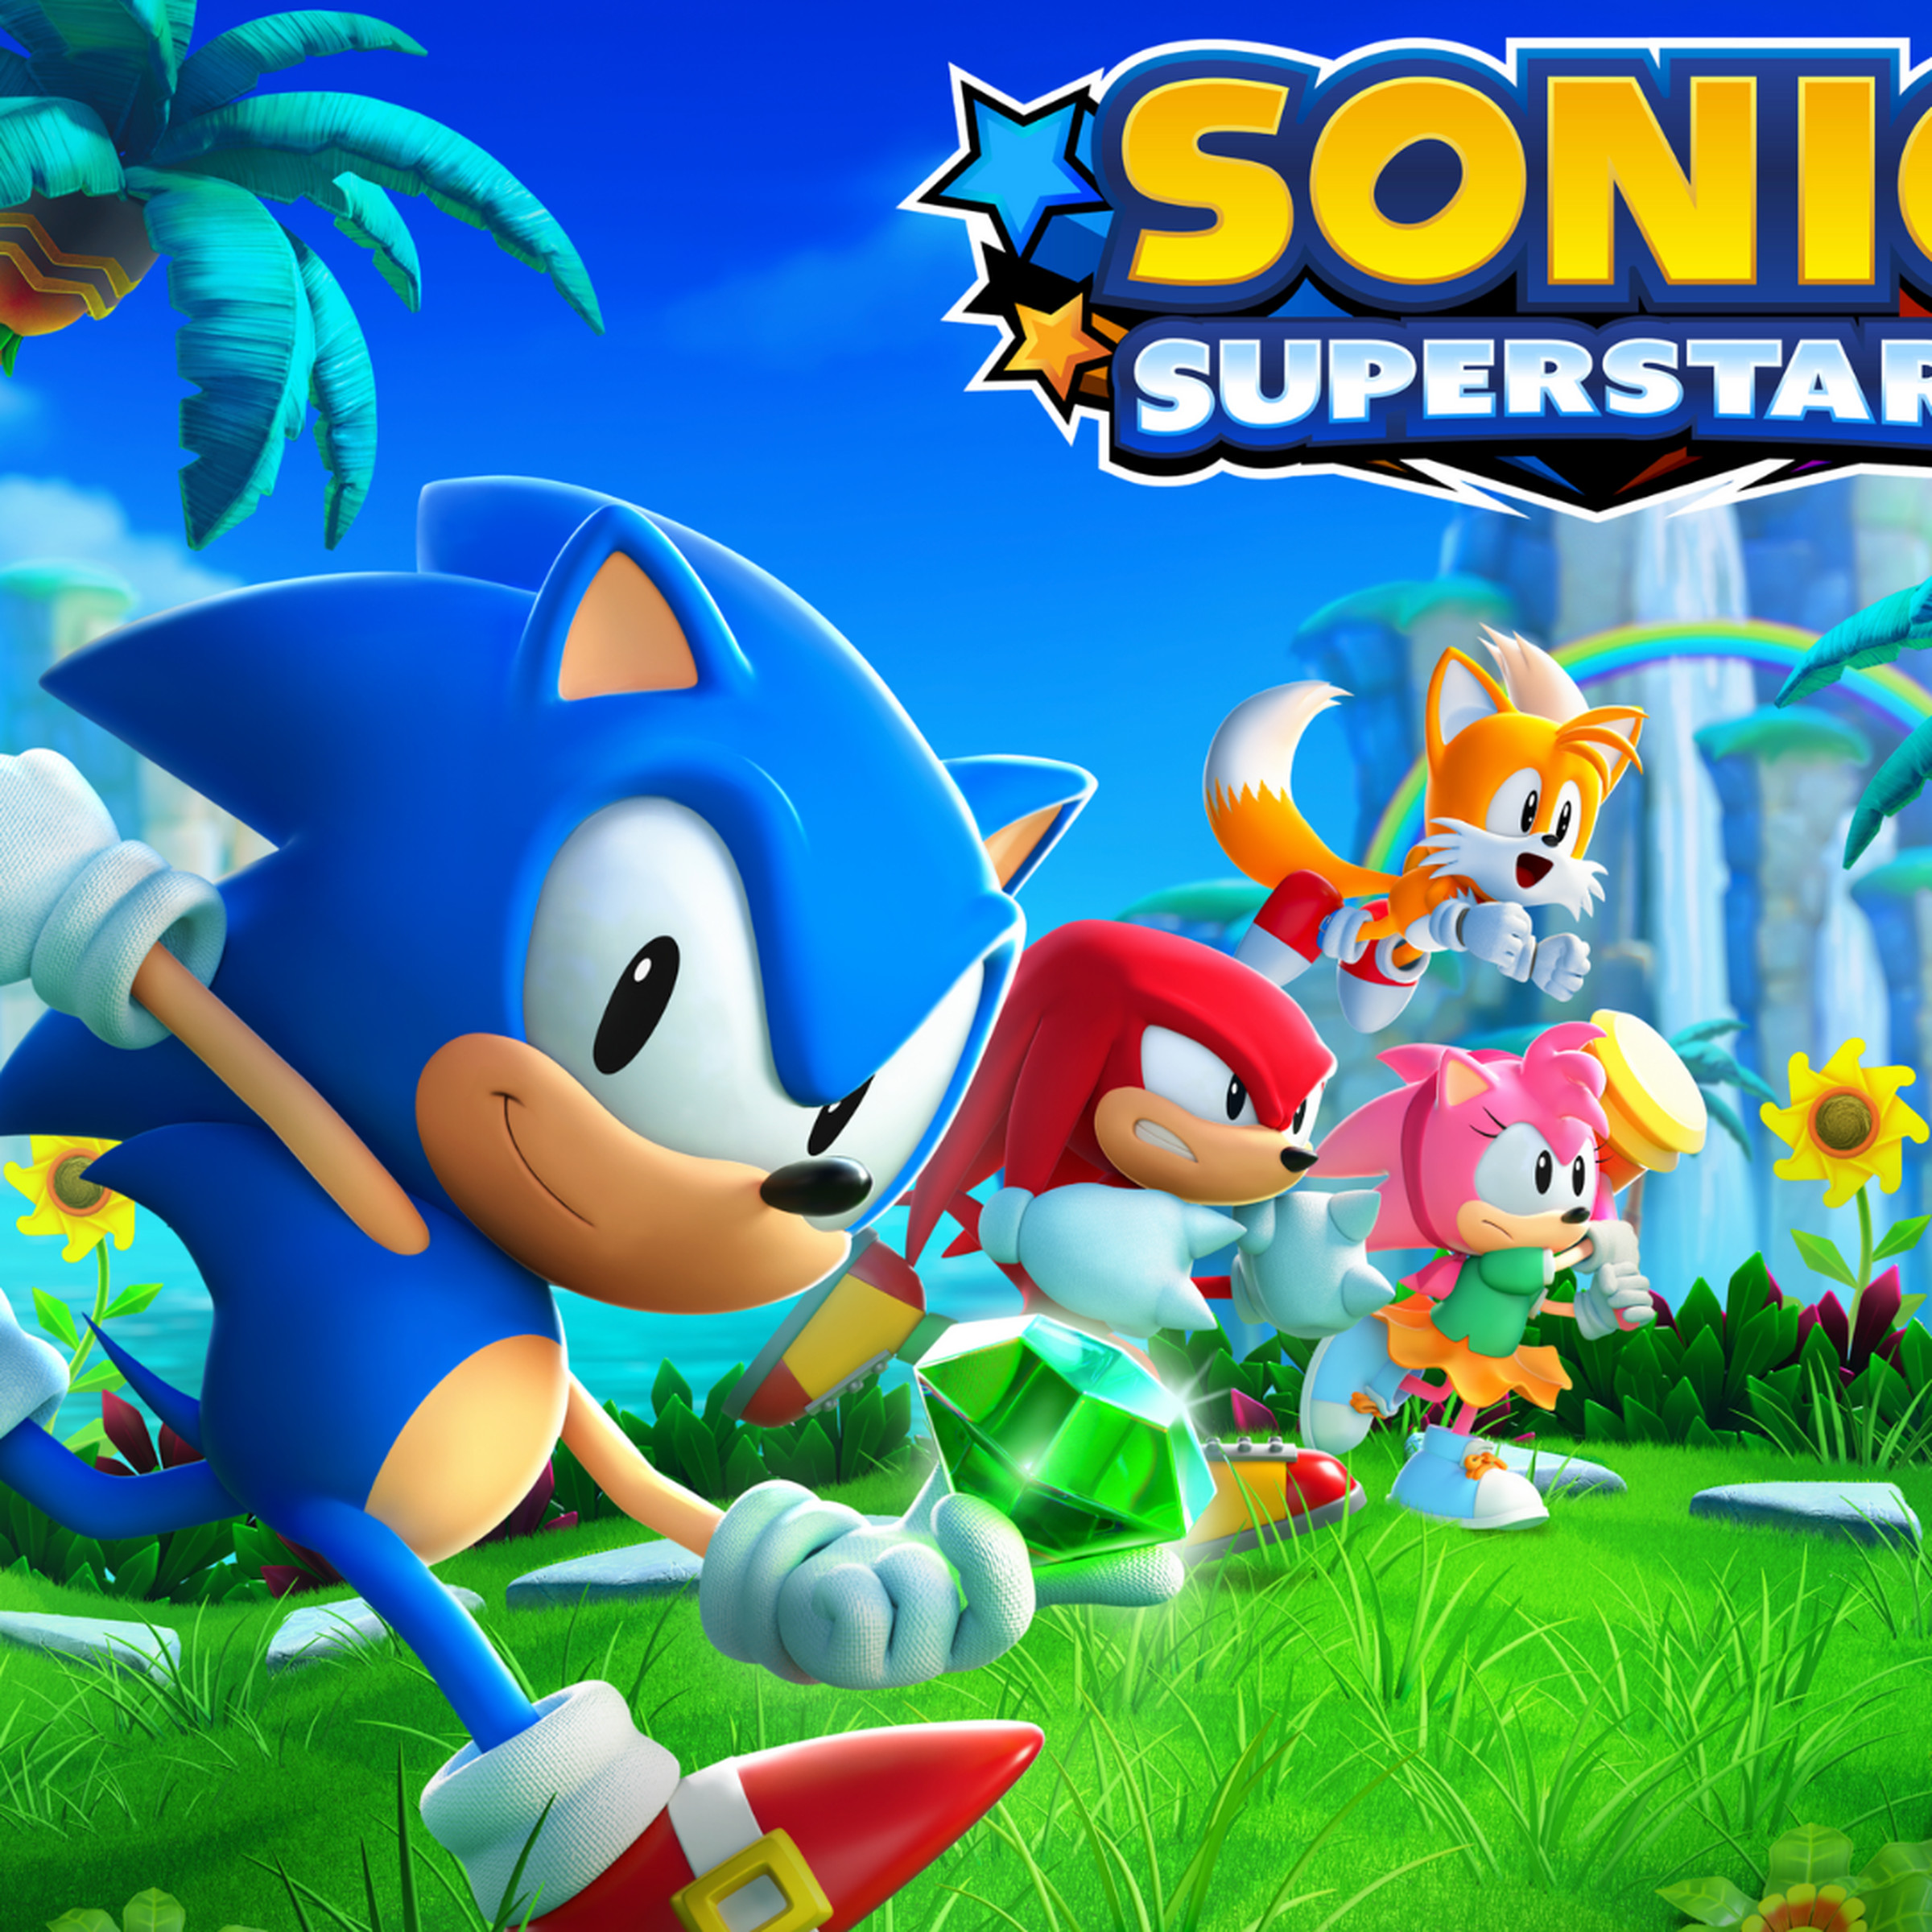 Key art of Sonic Superstars featuring 3D sprites of Sonic, Amy, Tails, and Knuckles